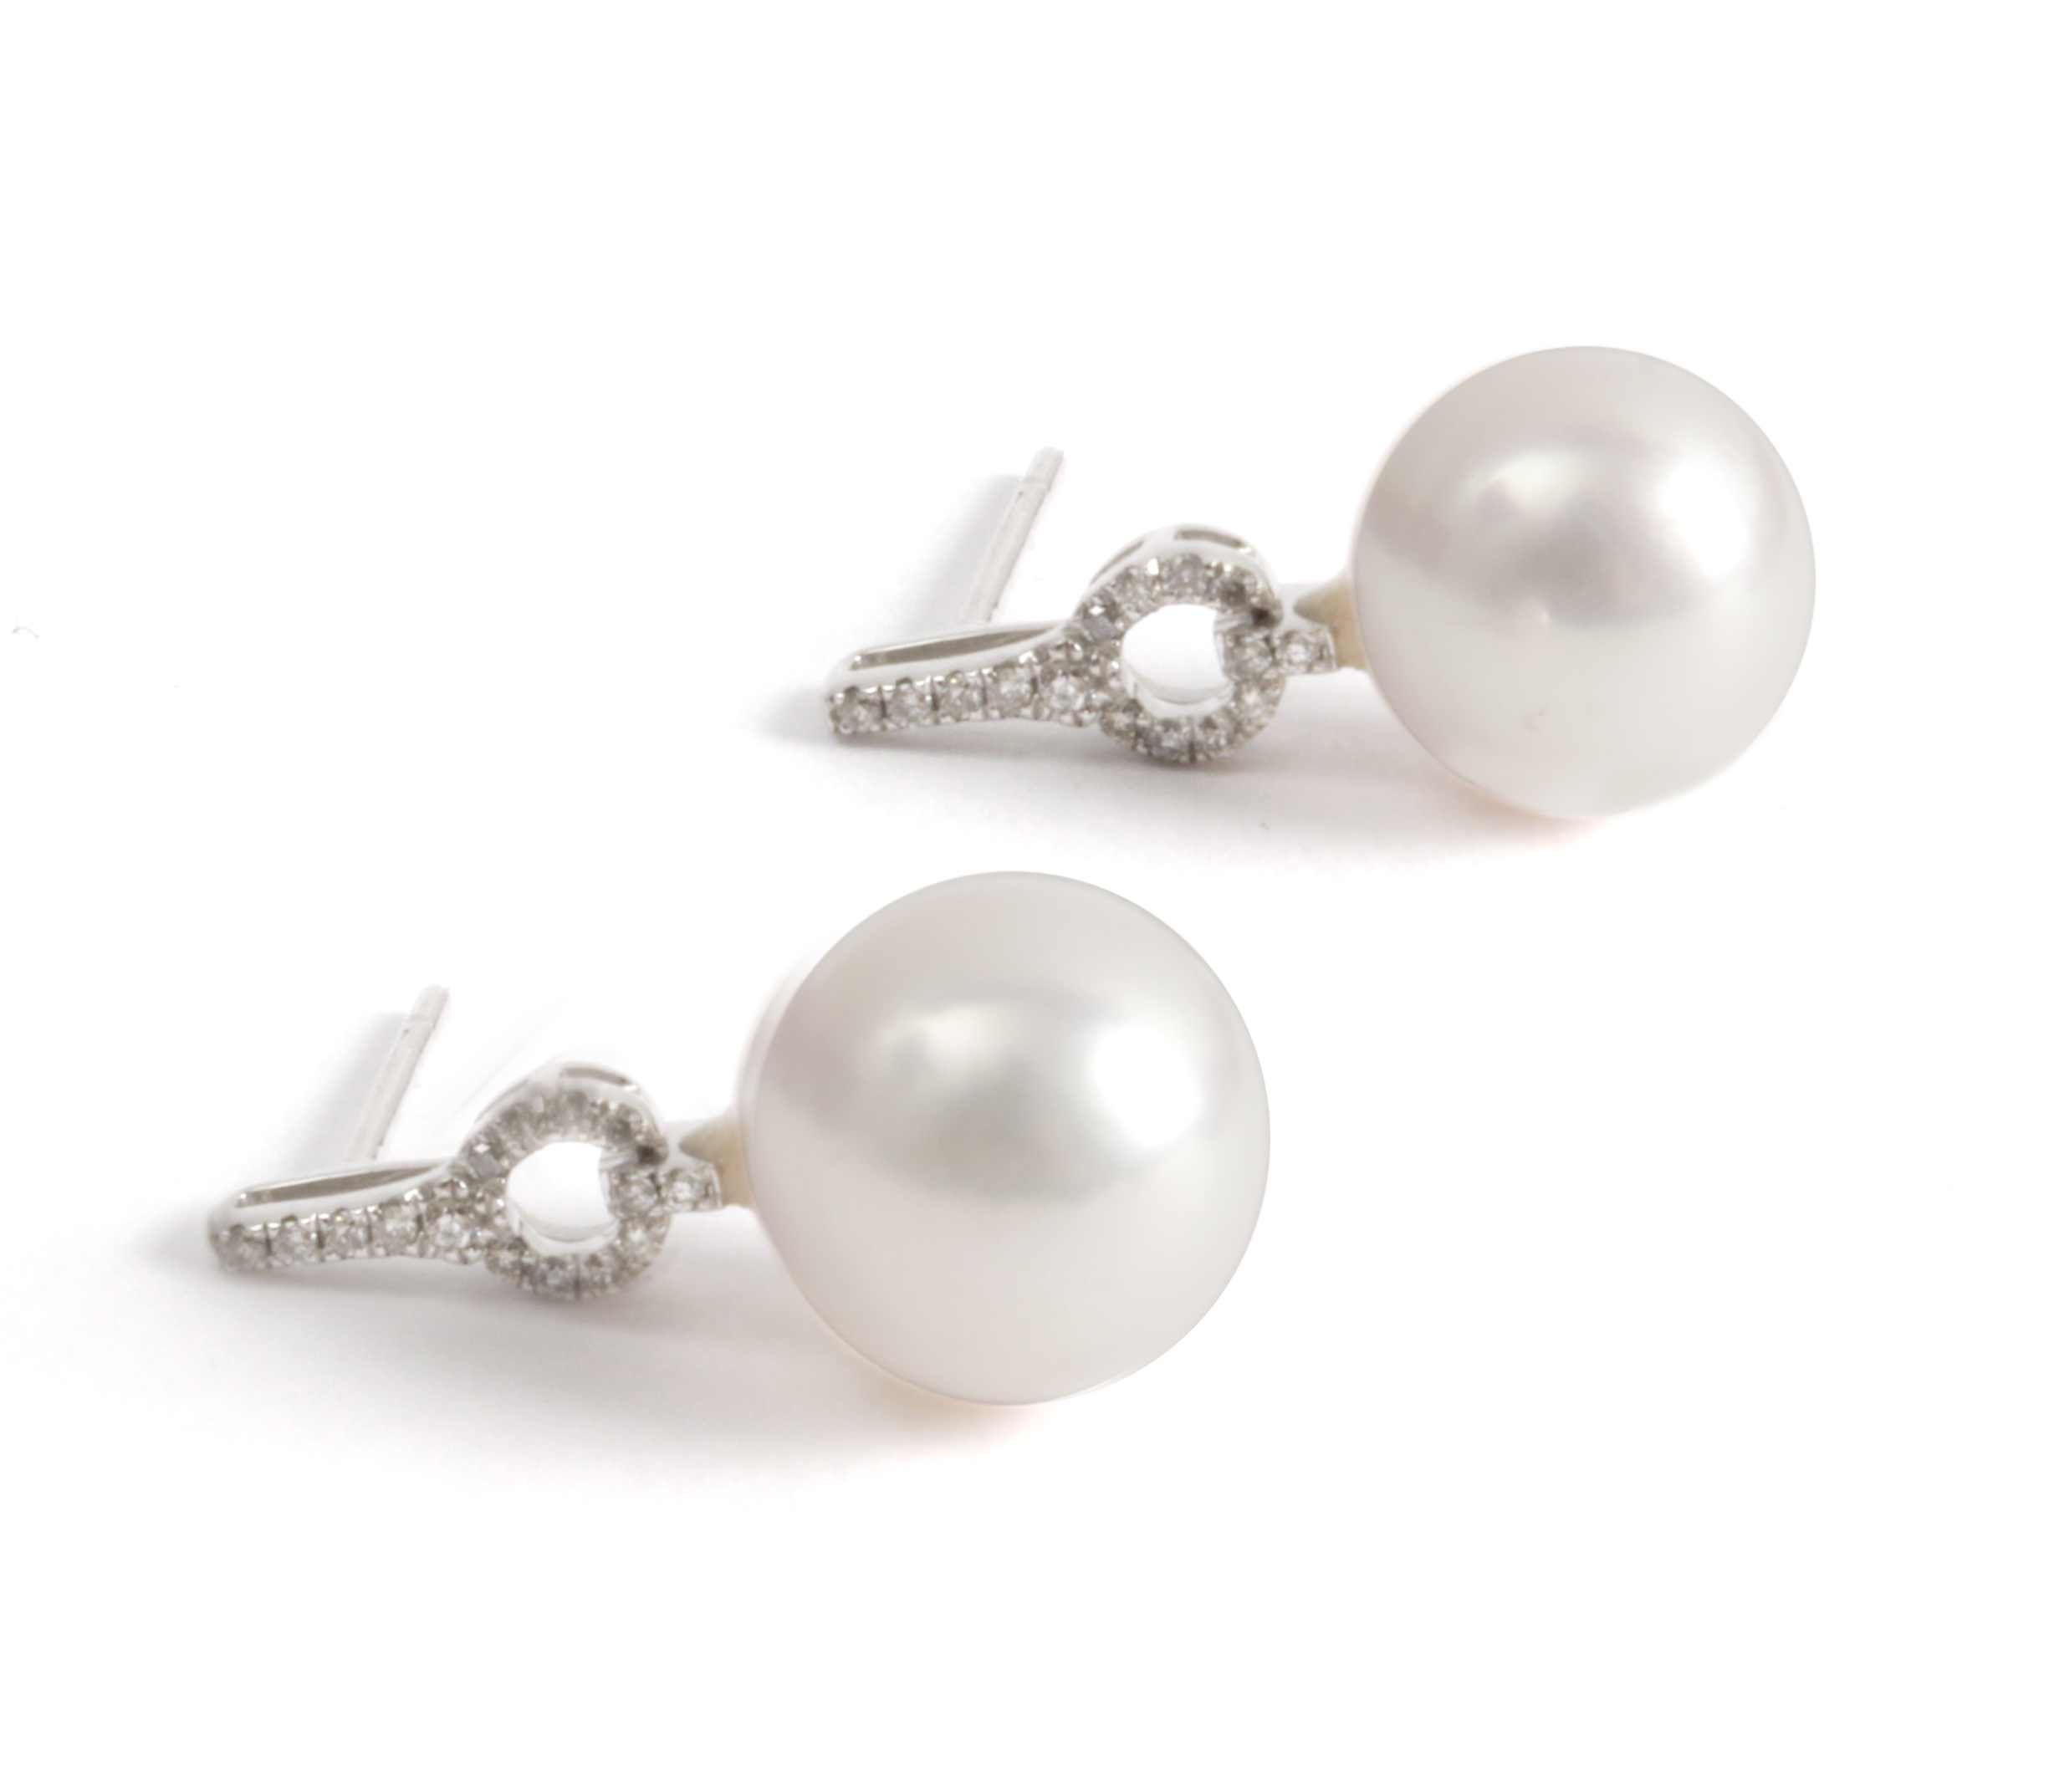 18k. white gold, brilliant cut diamonds and cultured pearls earrings - Image 2 of 2